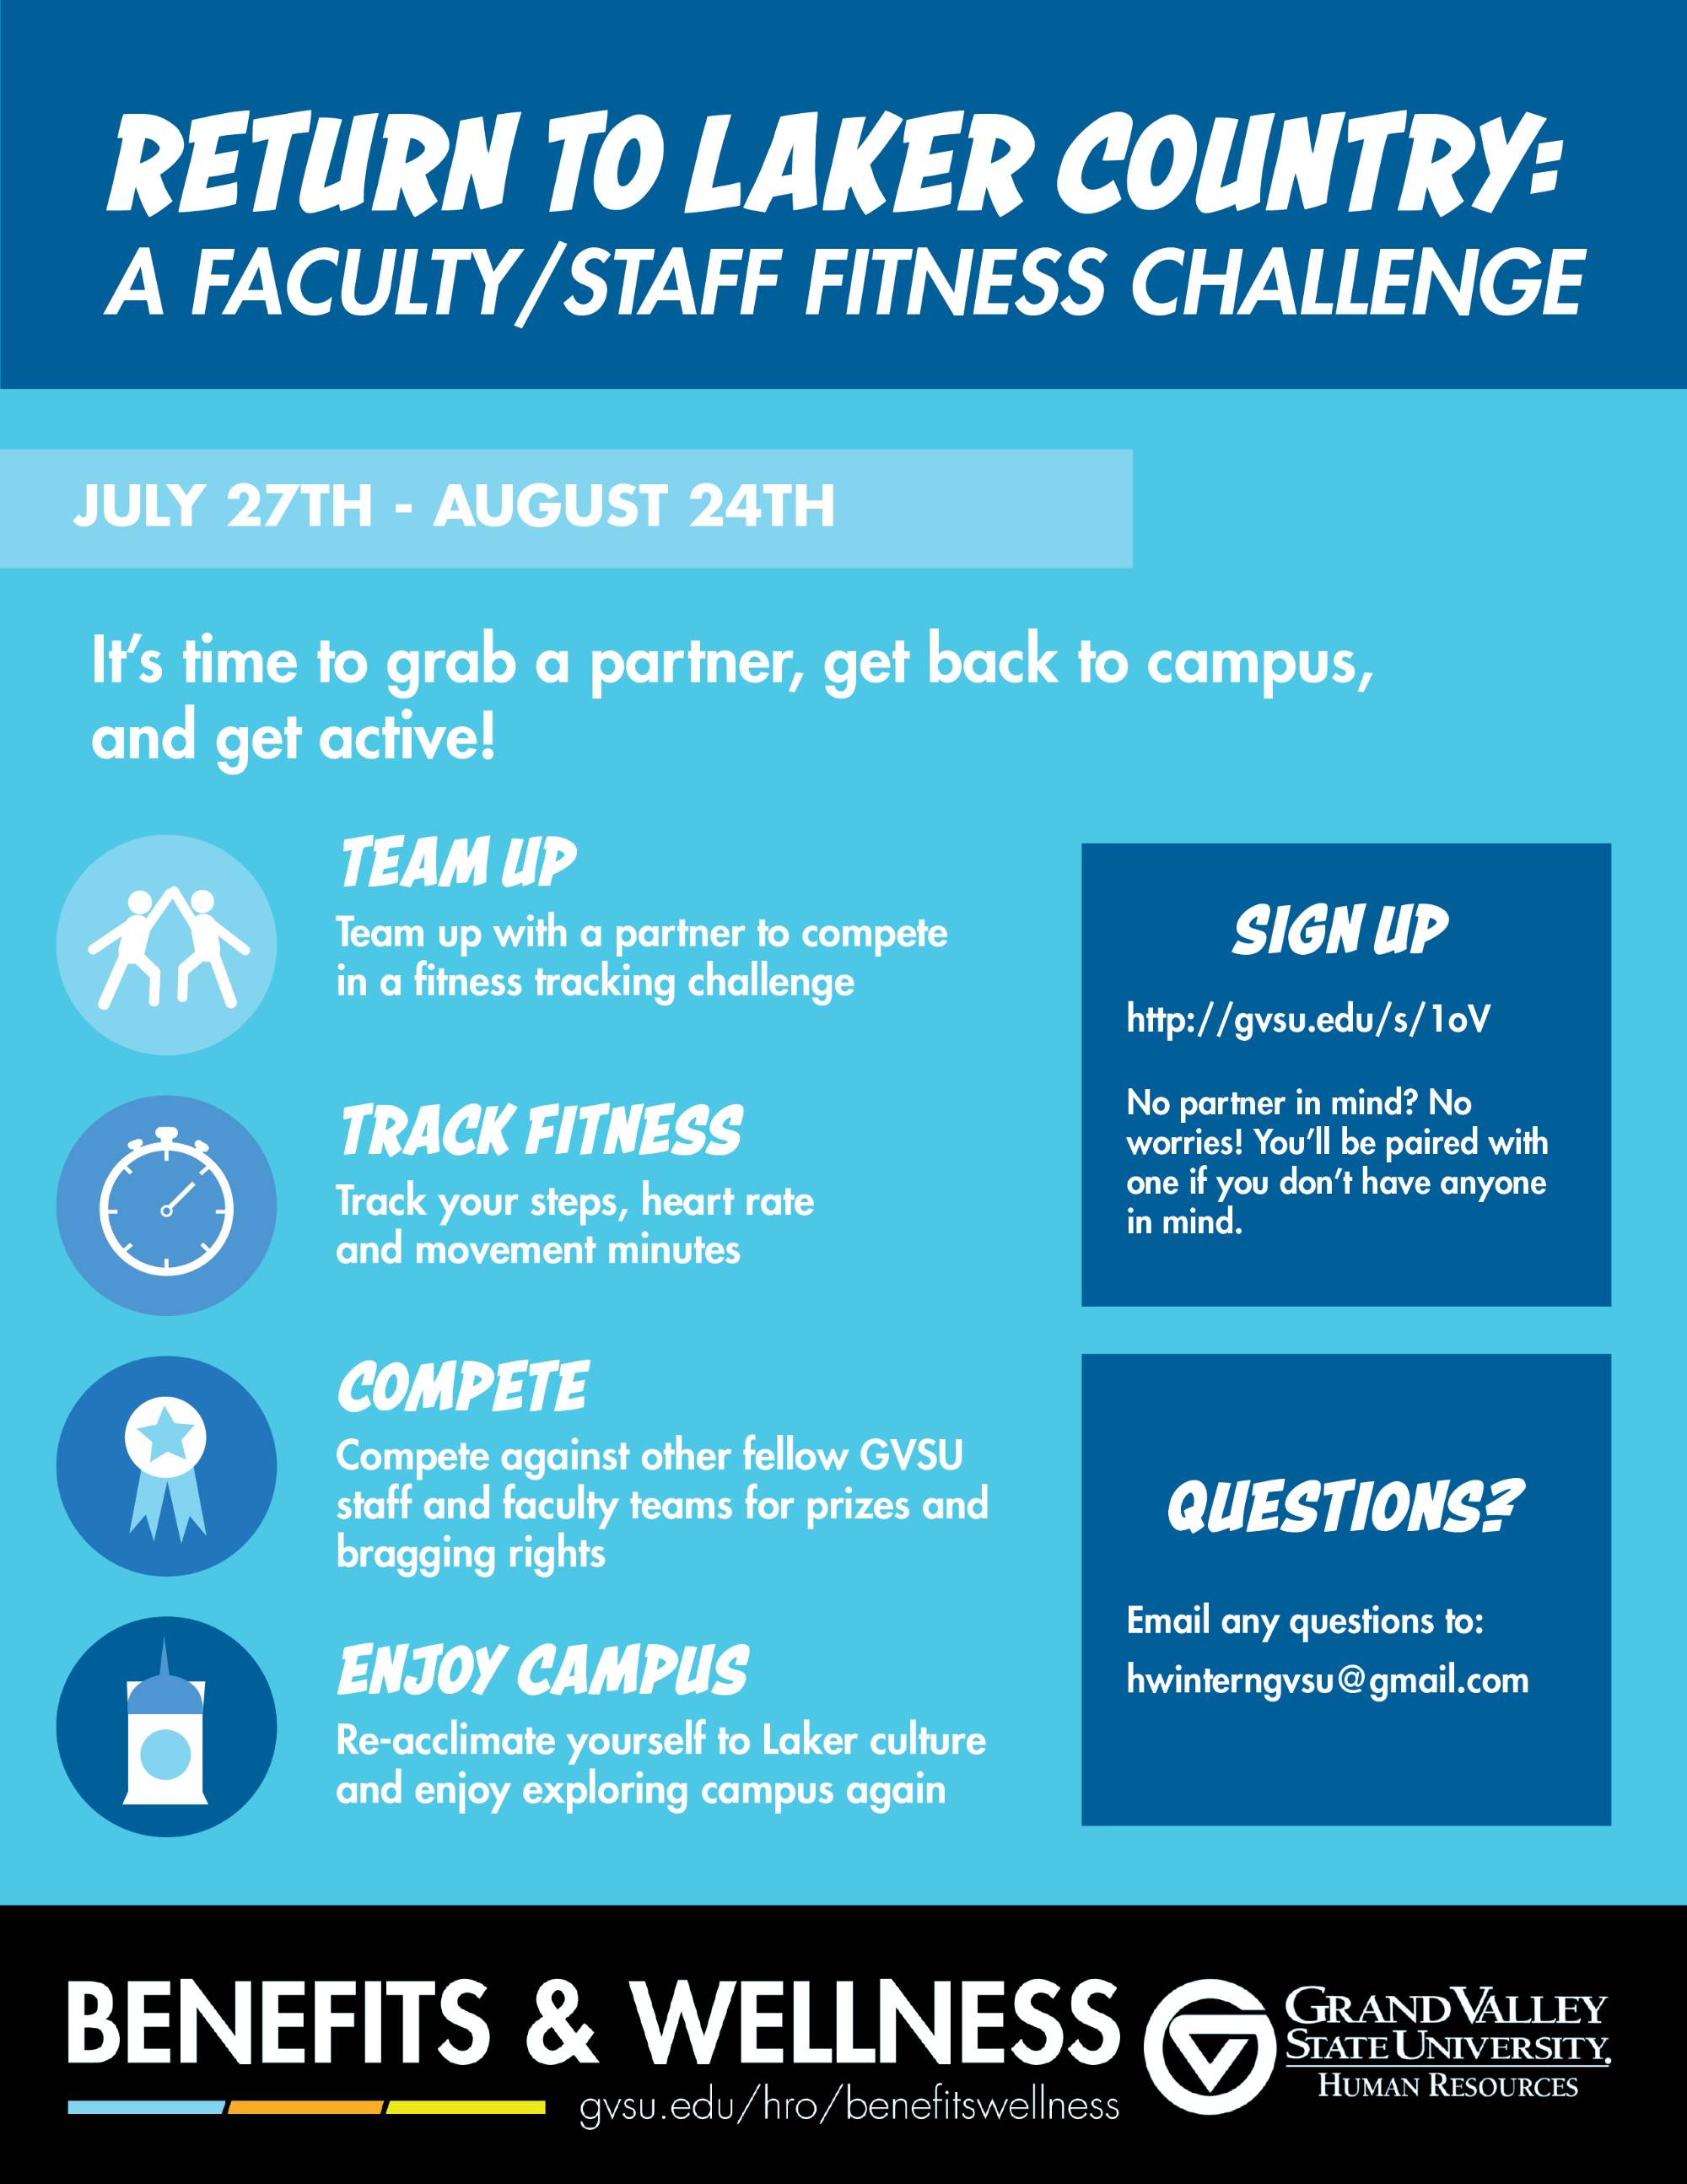 Return to Laker Country: A Faculty/Staff Fitness Challenge Flier